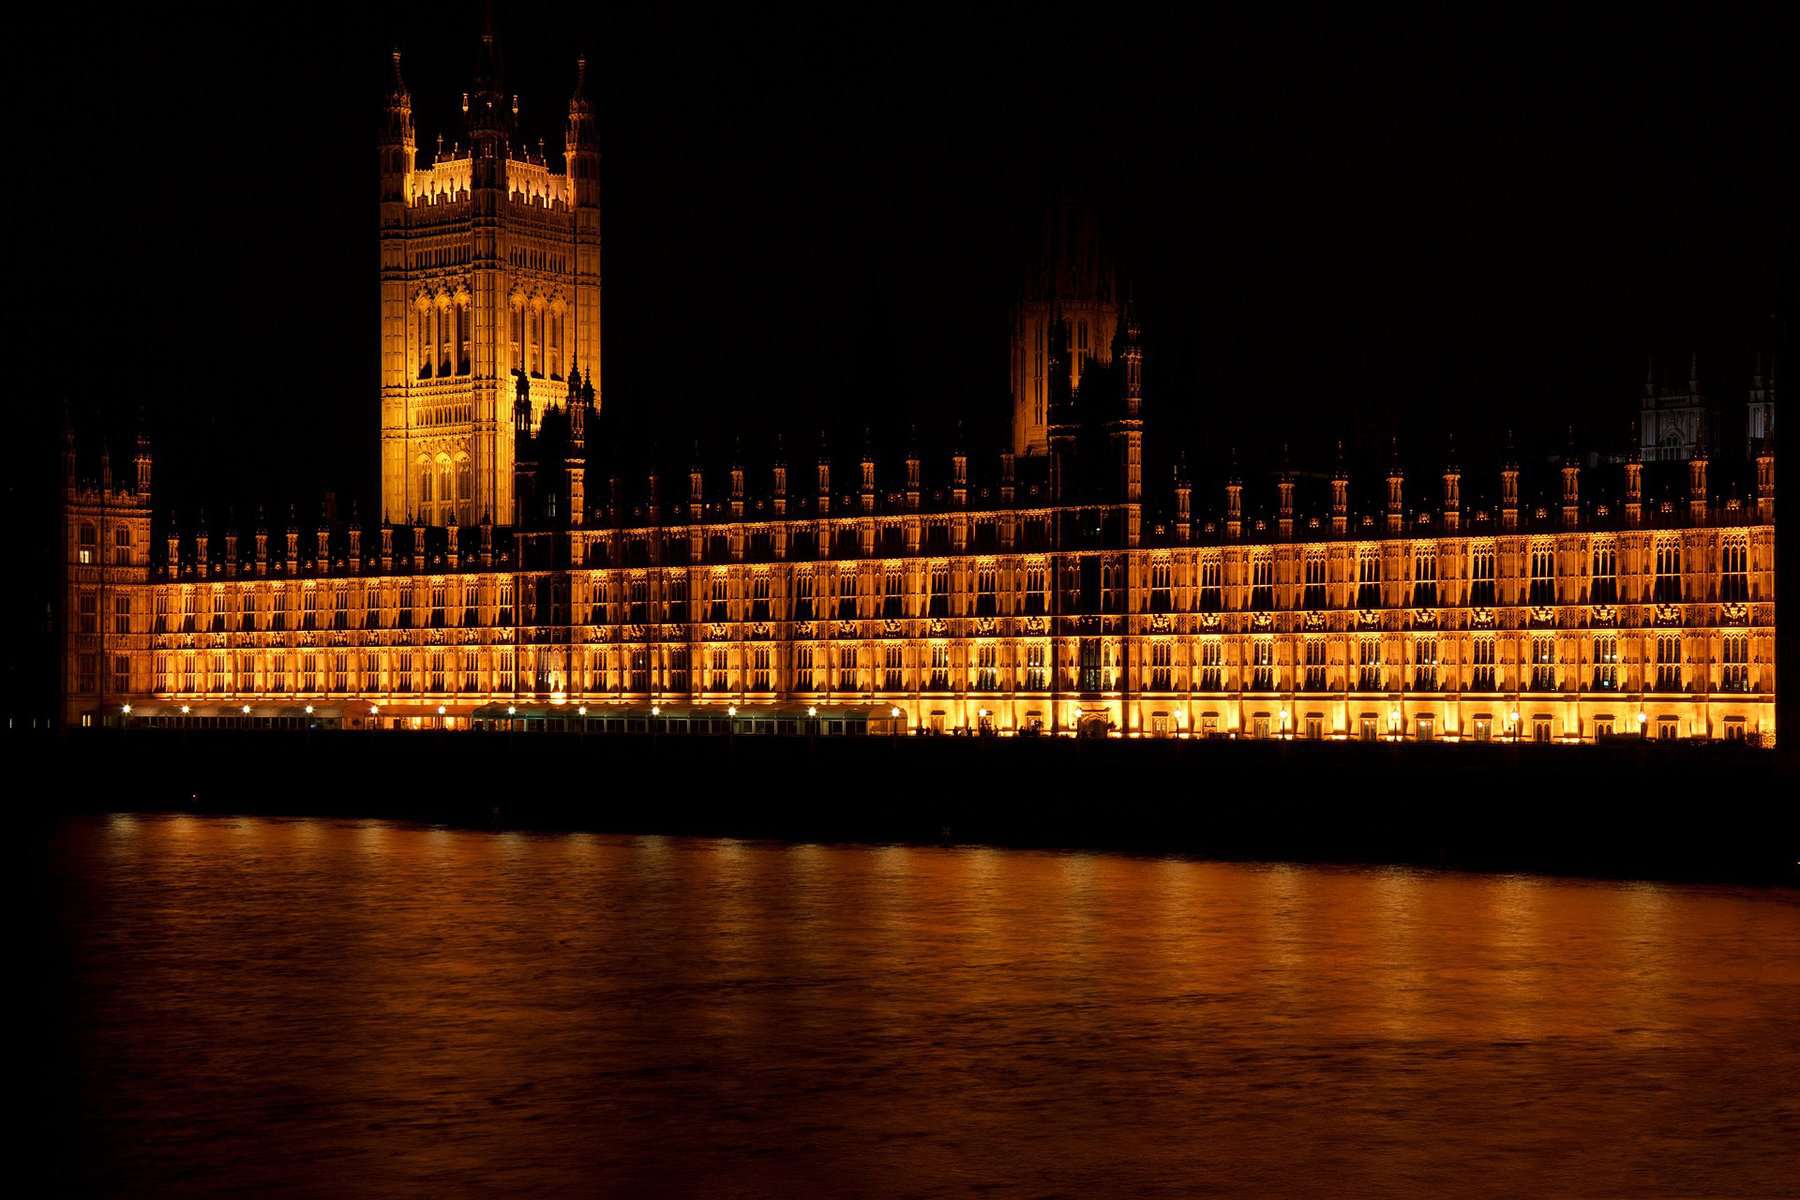 Westminster palace bridge is shown reflecting on water at night.